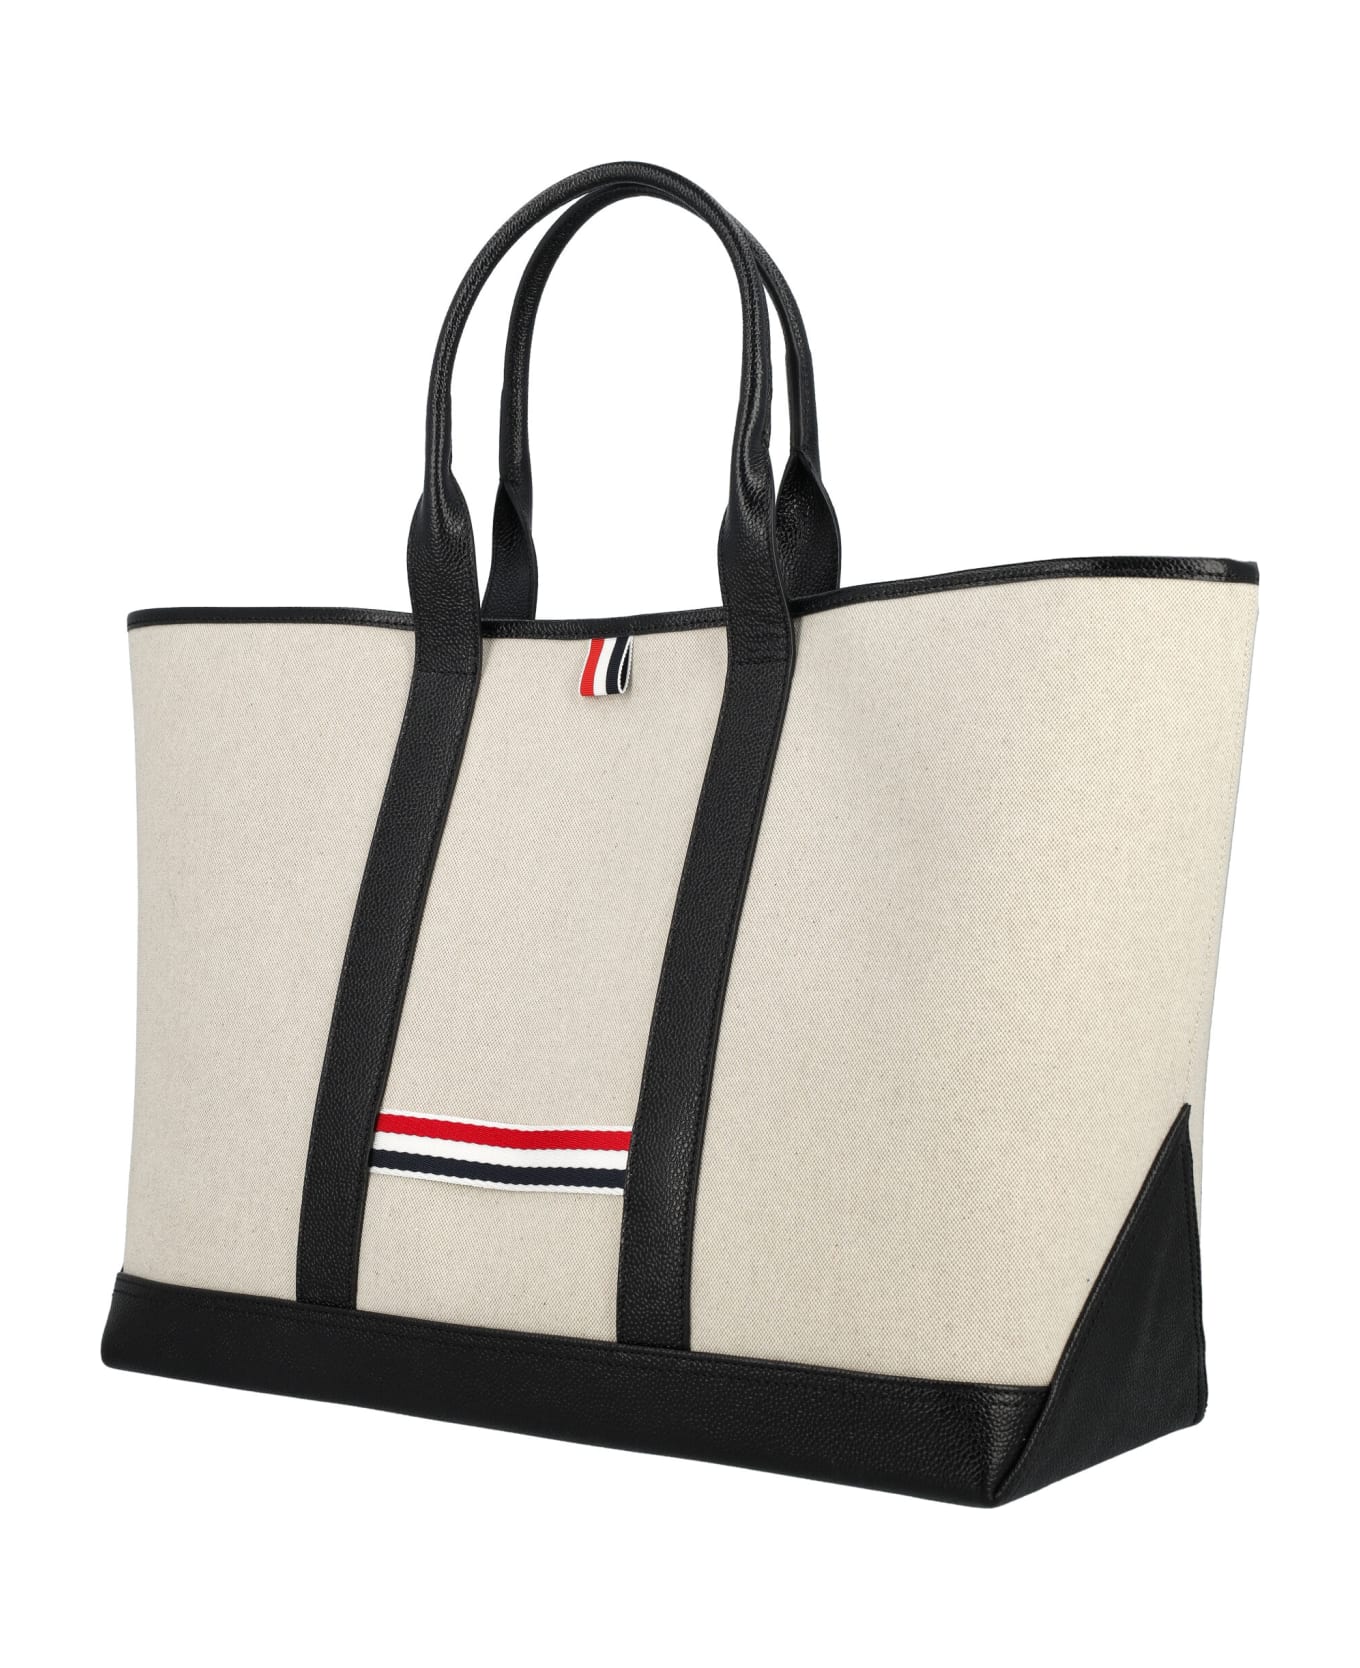 Thom Browne Medium Tool Tote W/ Leather Handles In S - NATURAL\BLACK トートバッグ